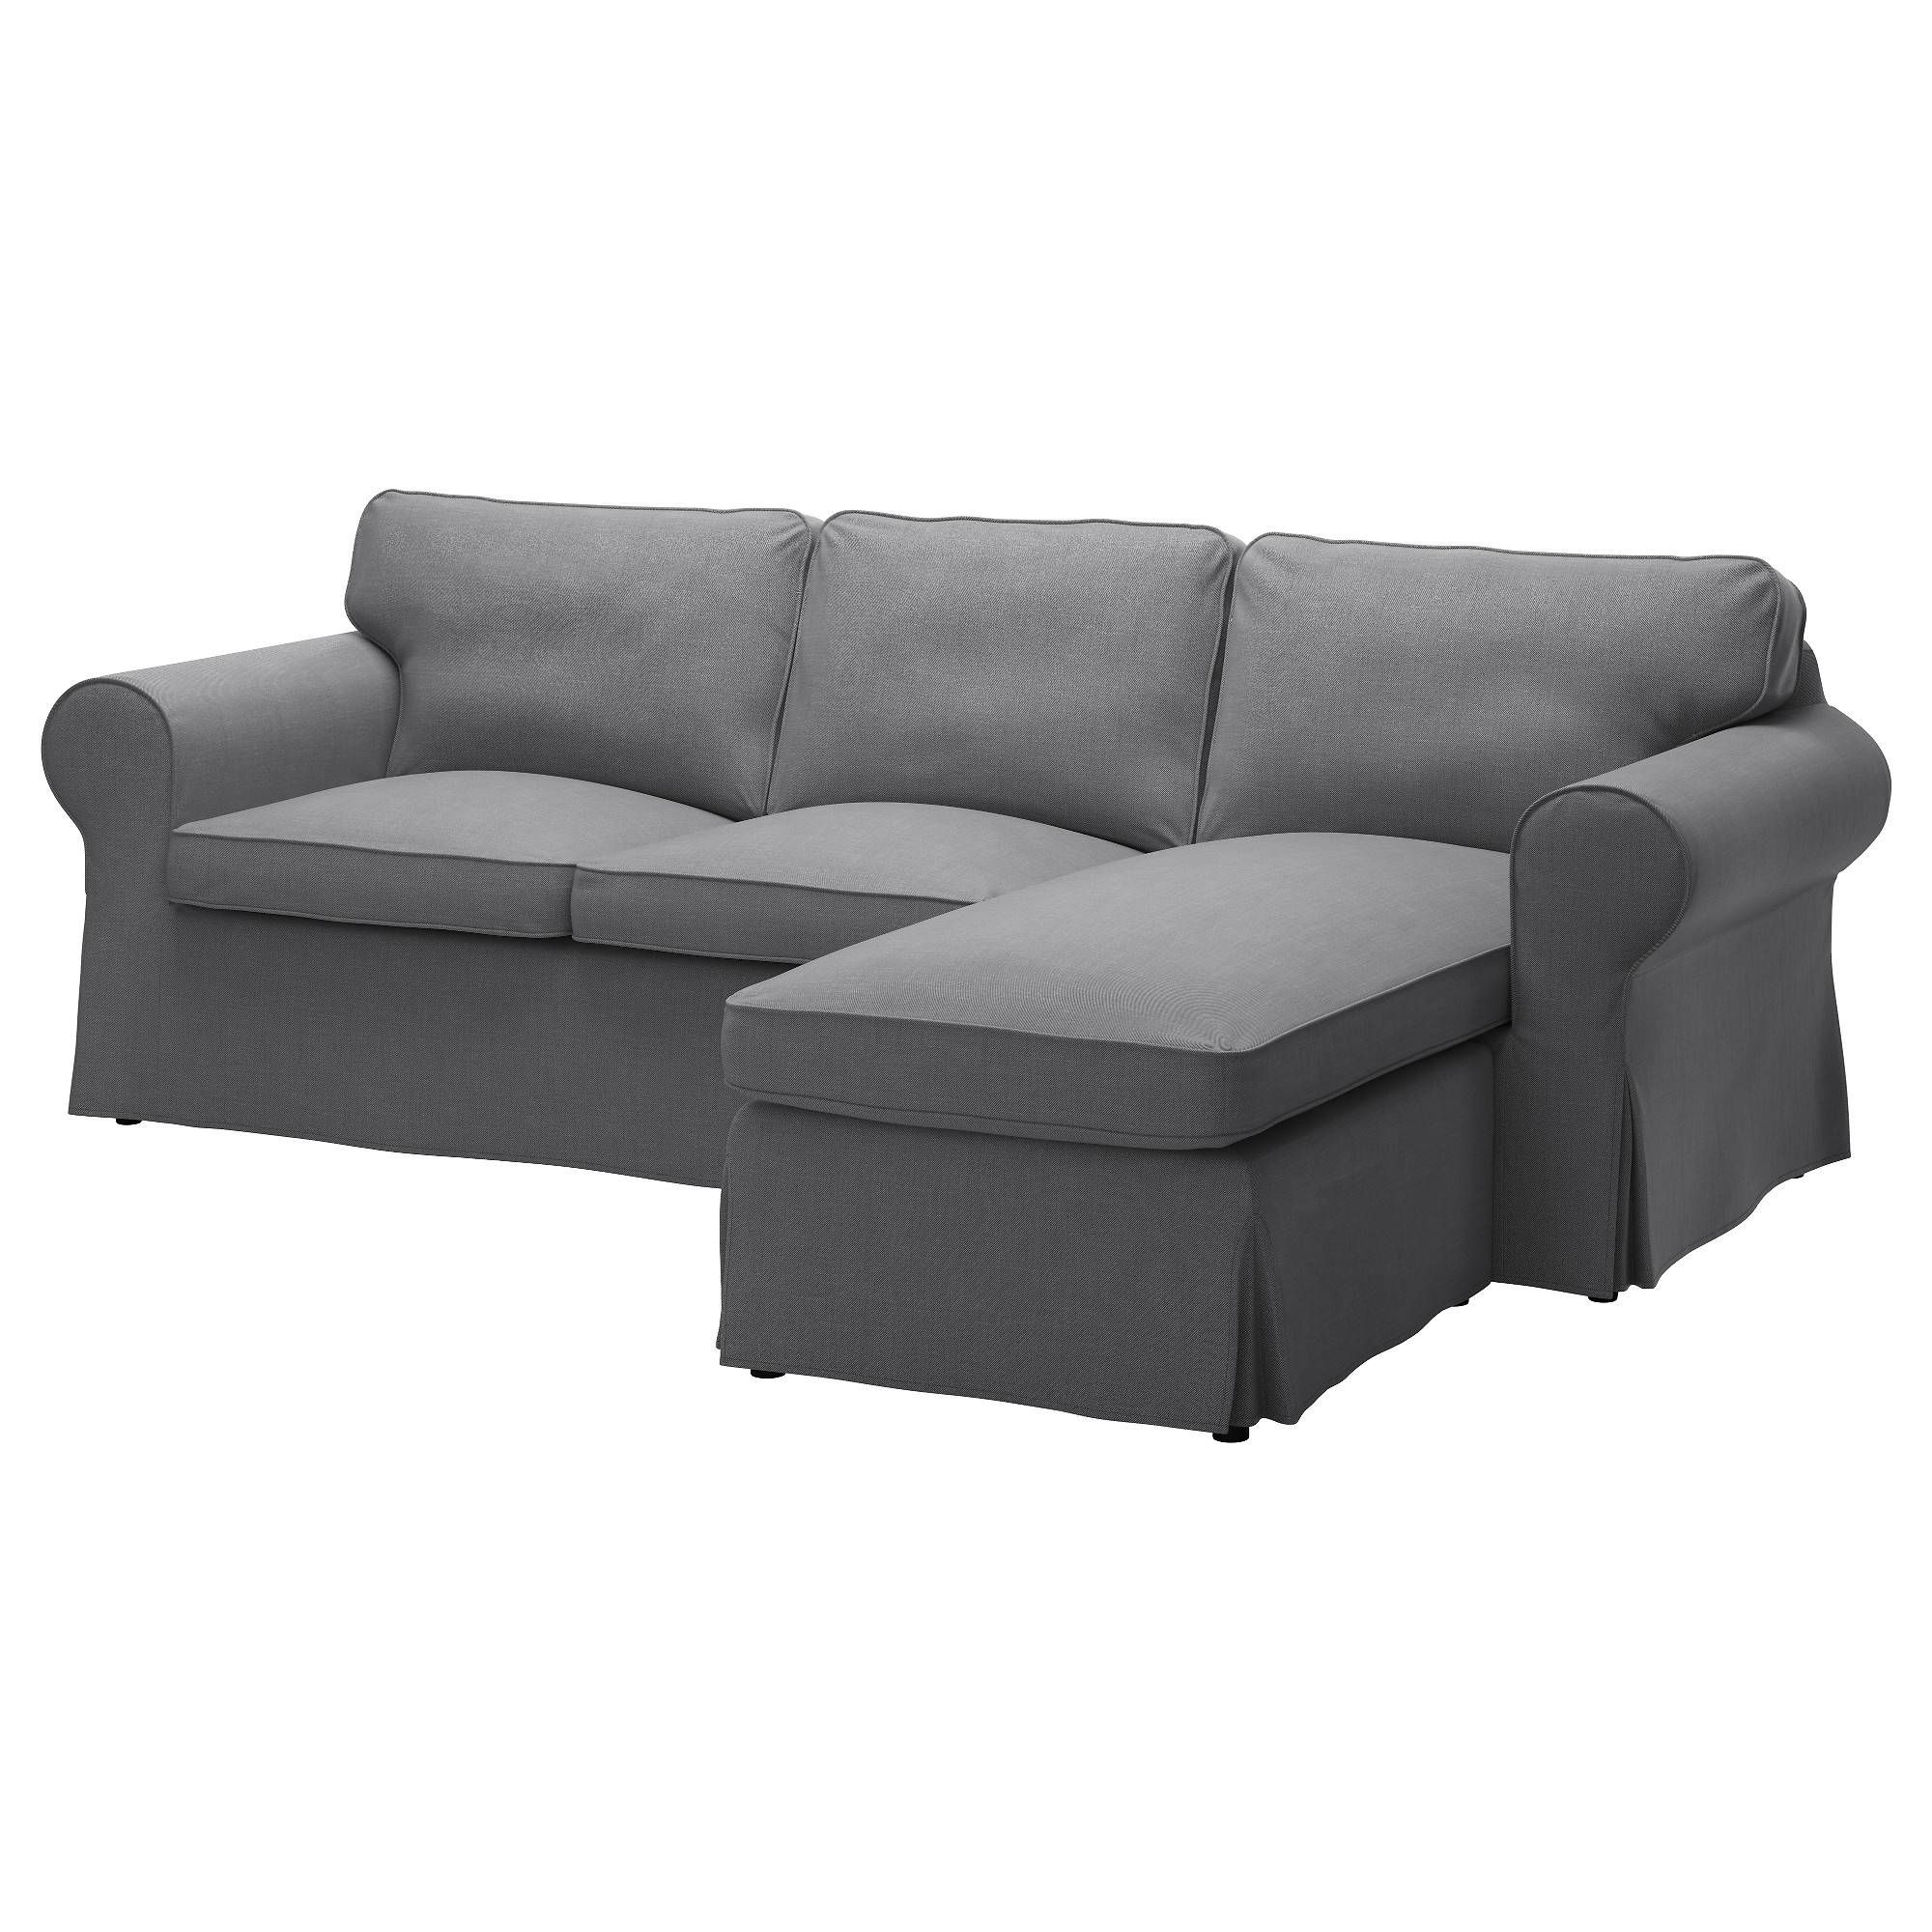 Sofas & Armchairs | Ikea For Sofa Chairs Ikea (View 6 of 30)